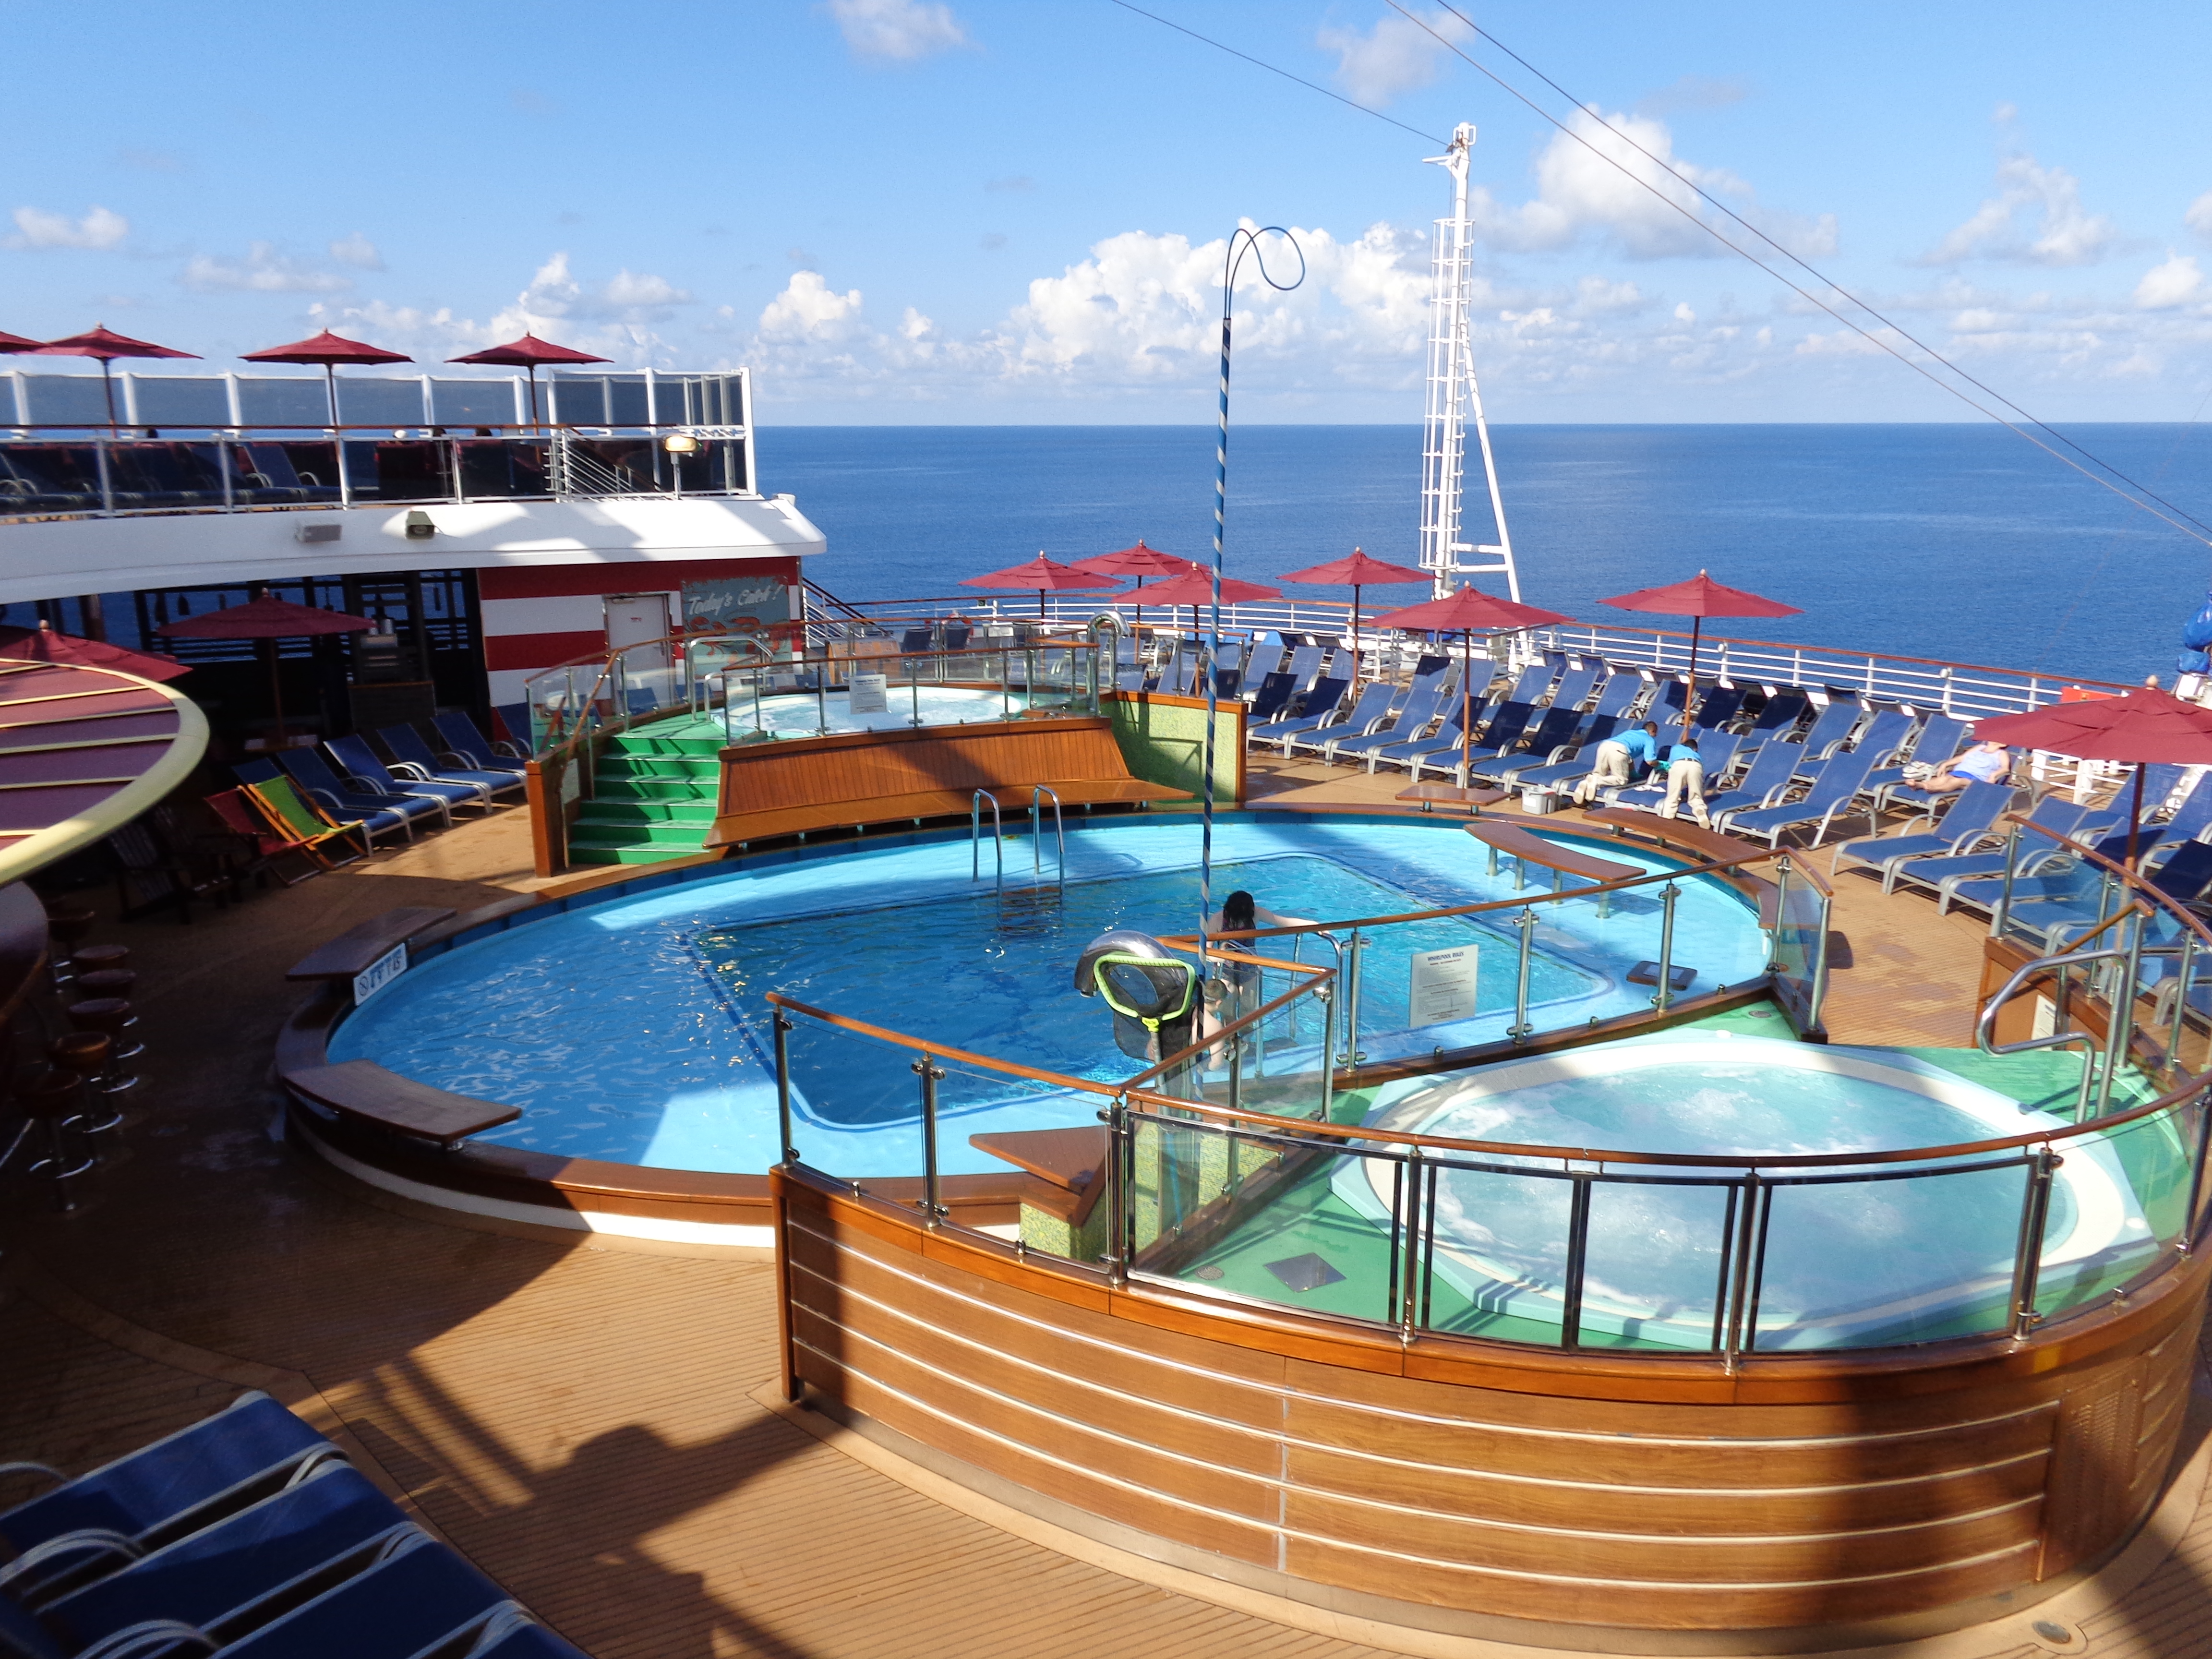 Pool on a Sea Day on Carnival Cruise Ship